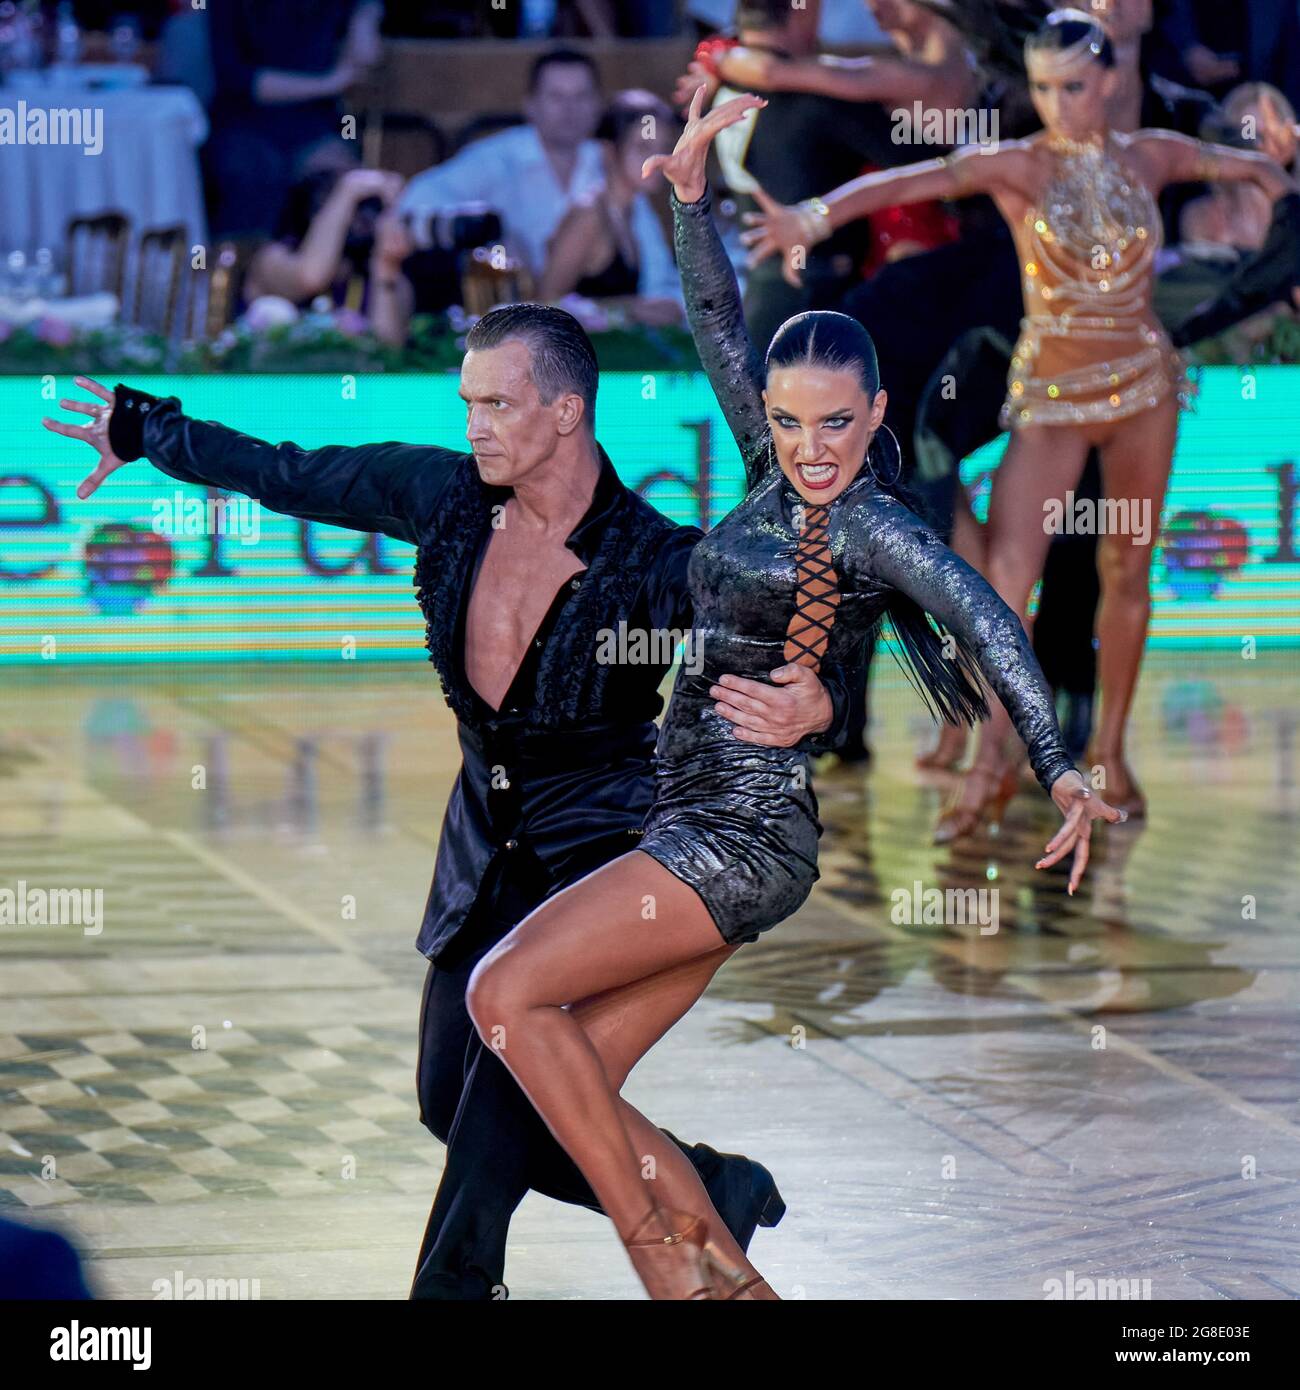 Moscow, Russia. 17th July, 2021. A hot ending of the Paso Doble dance during the 2021 Latin America Dance World Cup among professionals and amateurs in Moscow. Credit: SOPA Images Limited/Alamy Live News Stock Photo